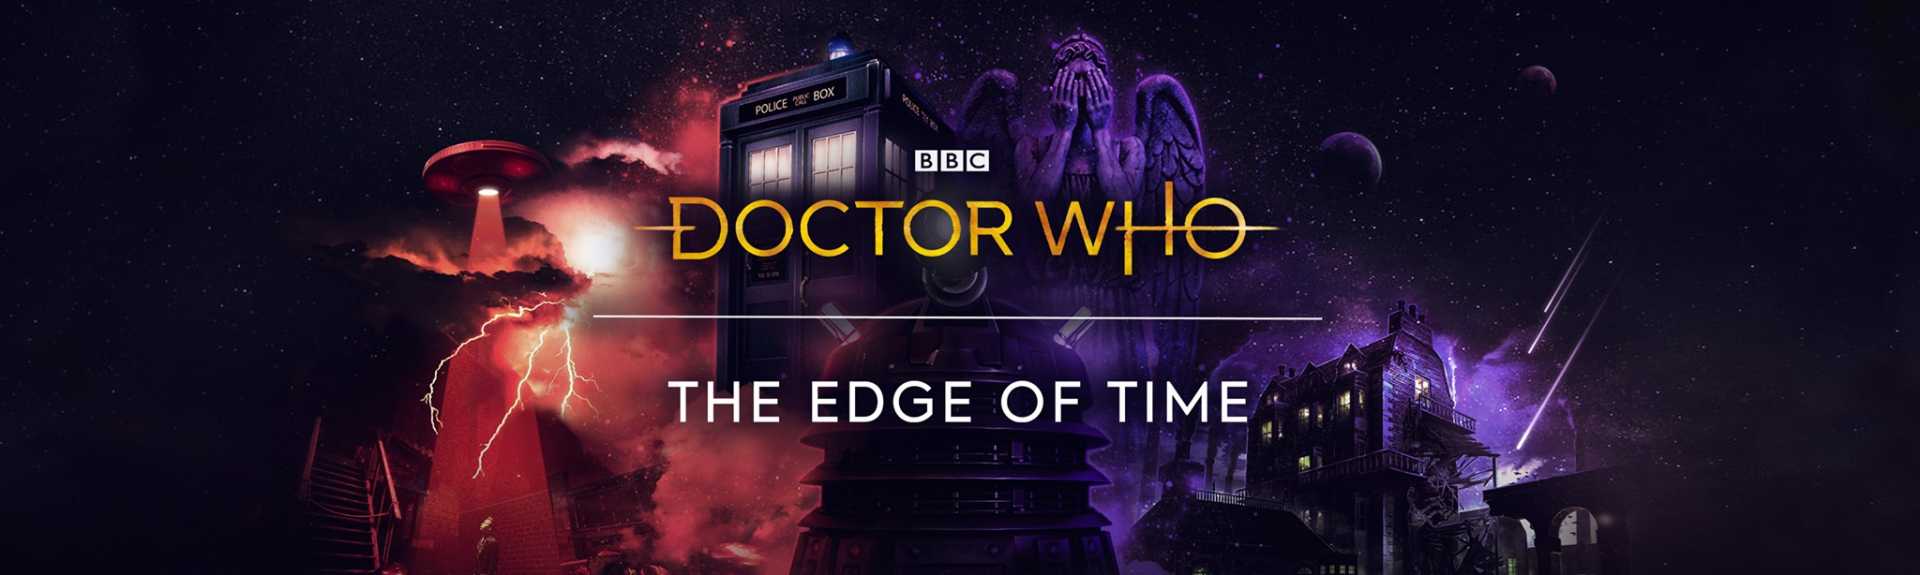 Doctor Who the Edge of Time